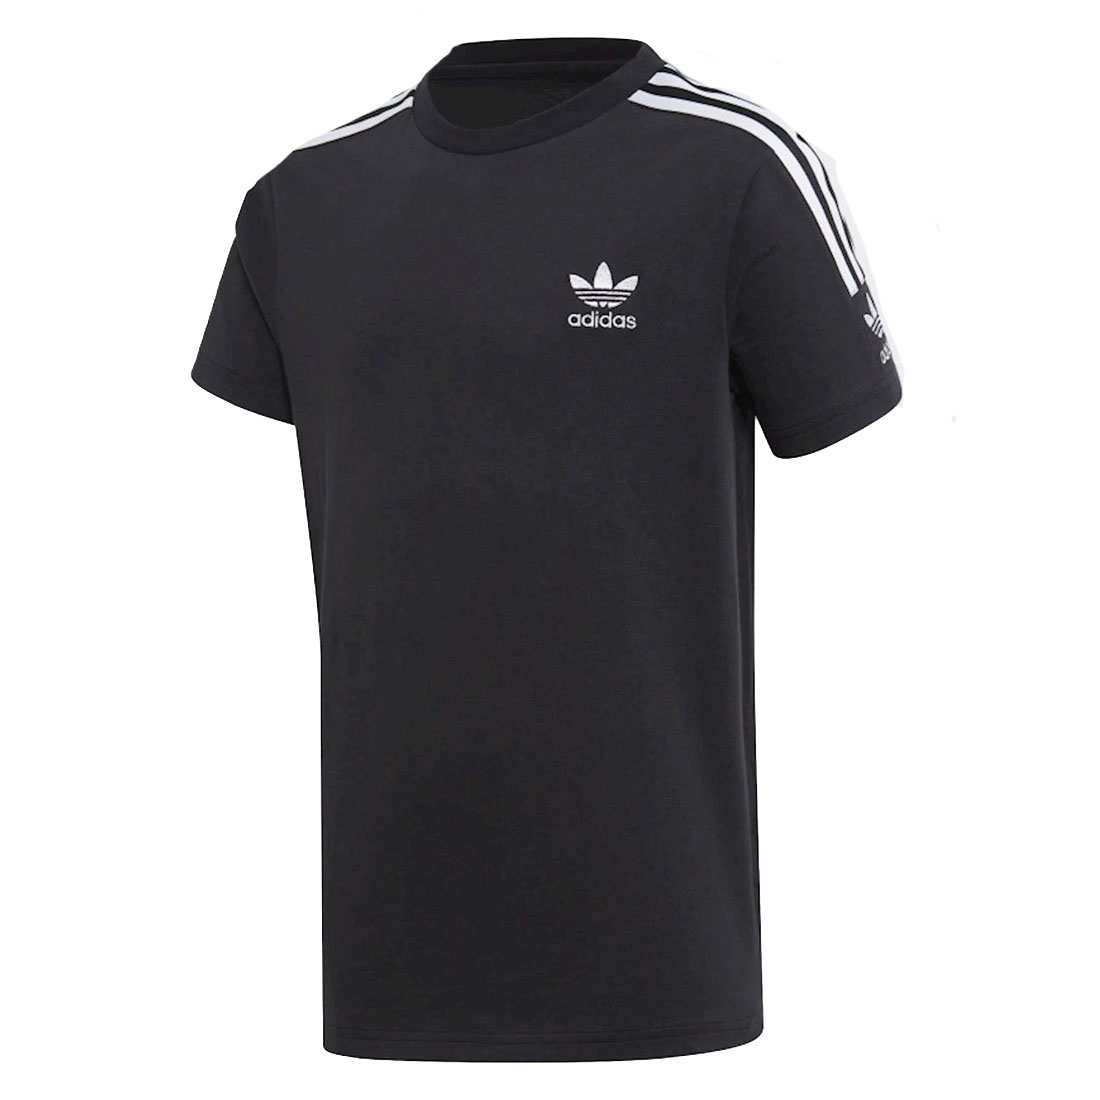 adidas New Icon Childrens Black T Shirt – Exclusive Sports